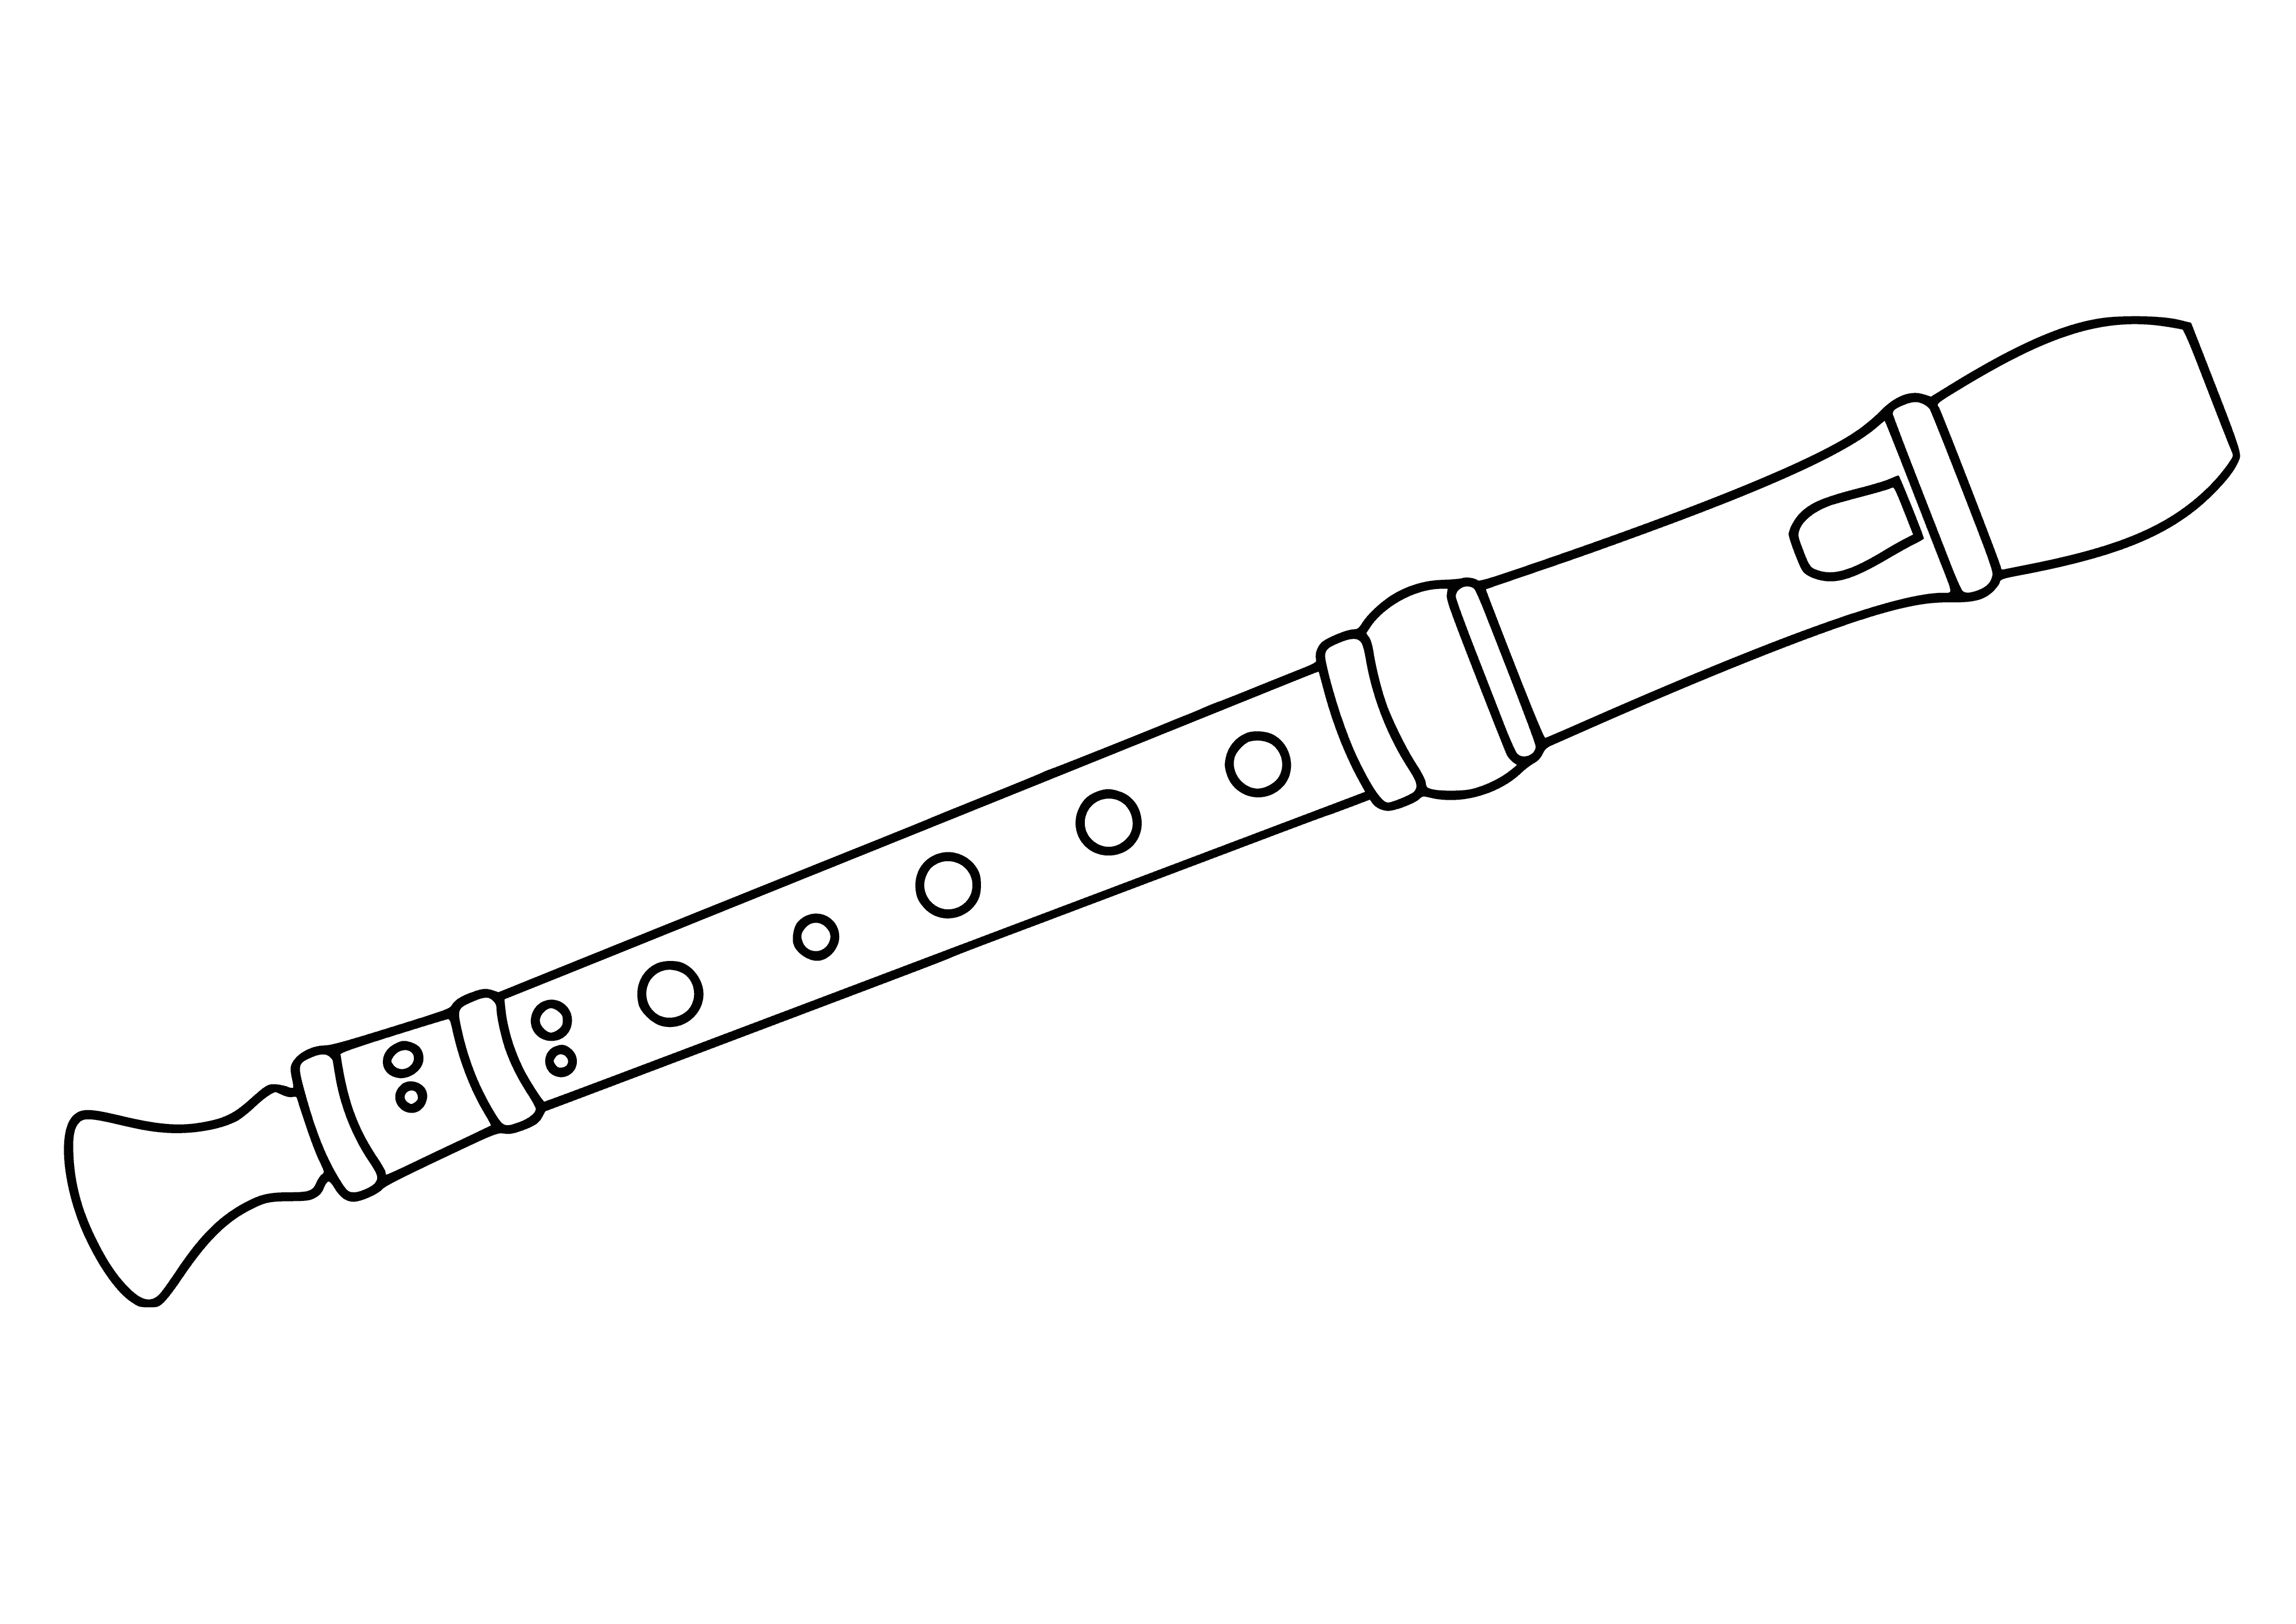 coloring page: Flute coloring page has metal flute with 3 buttons, holes in top and bottom, silver in color.